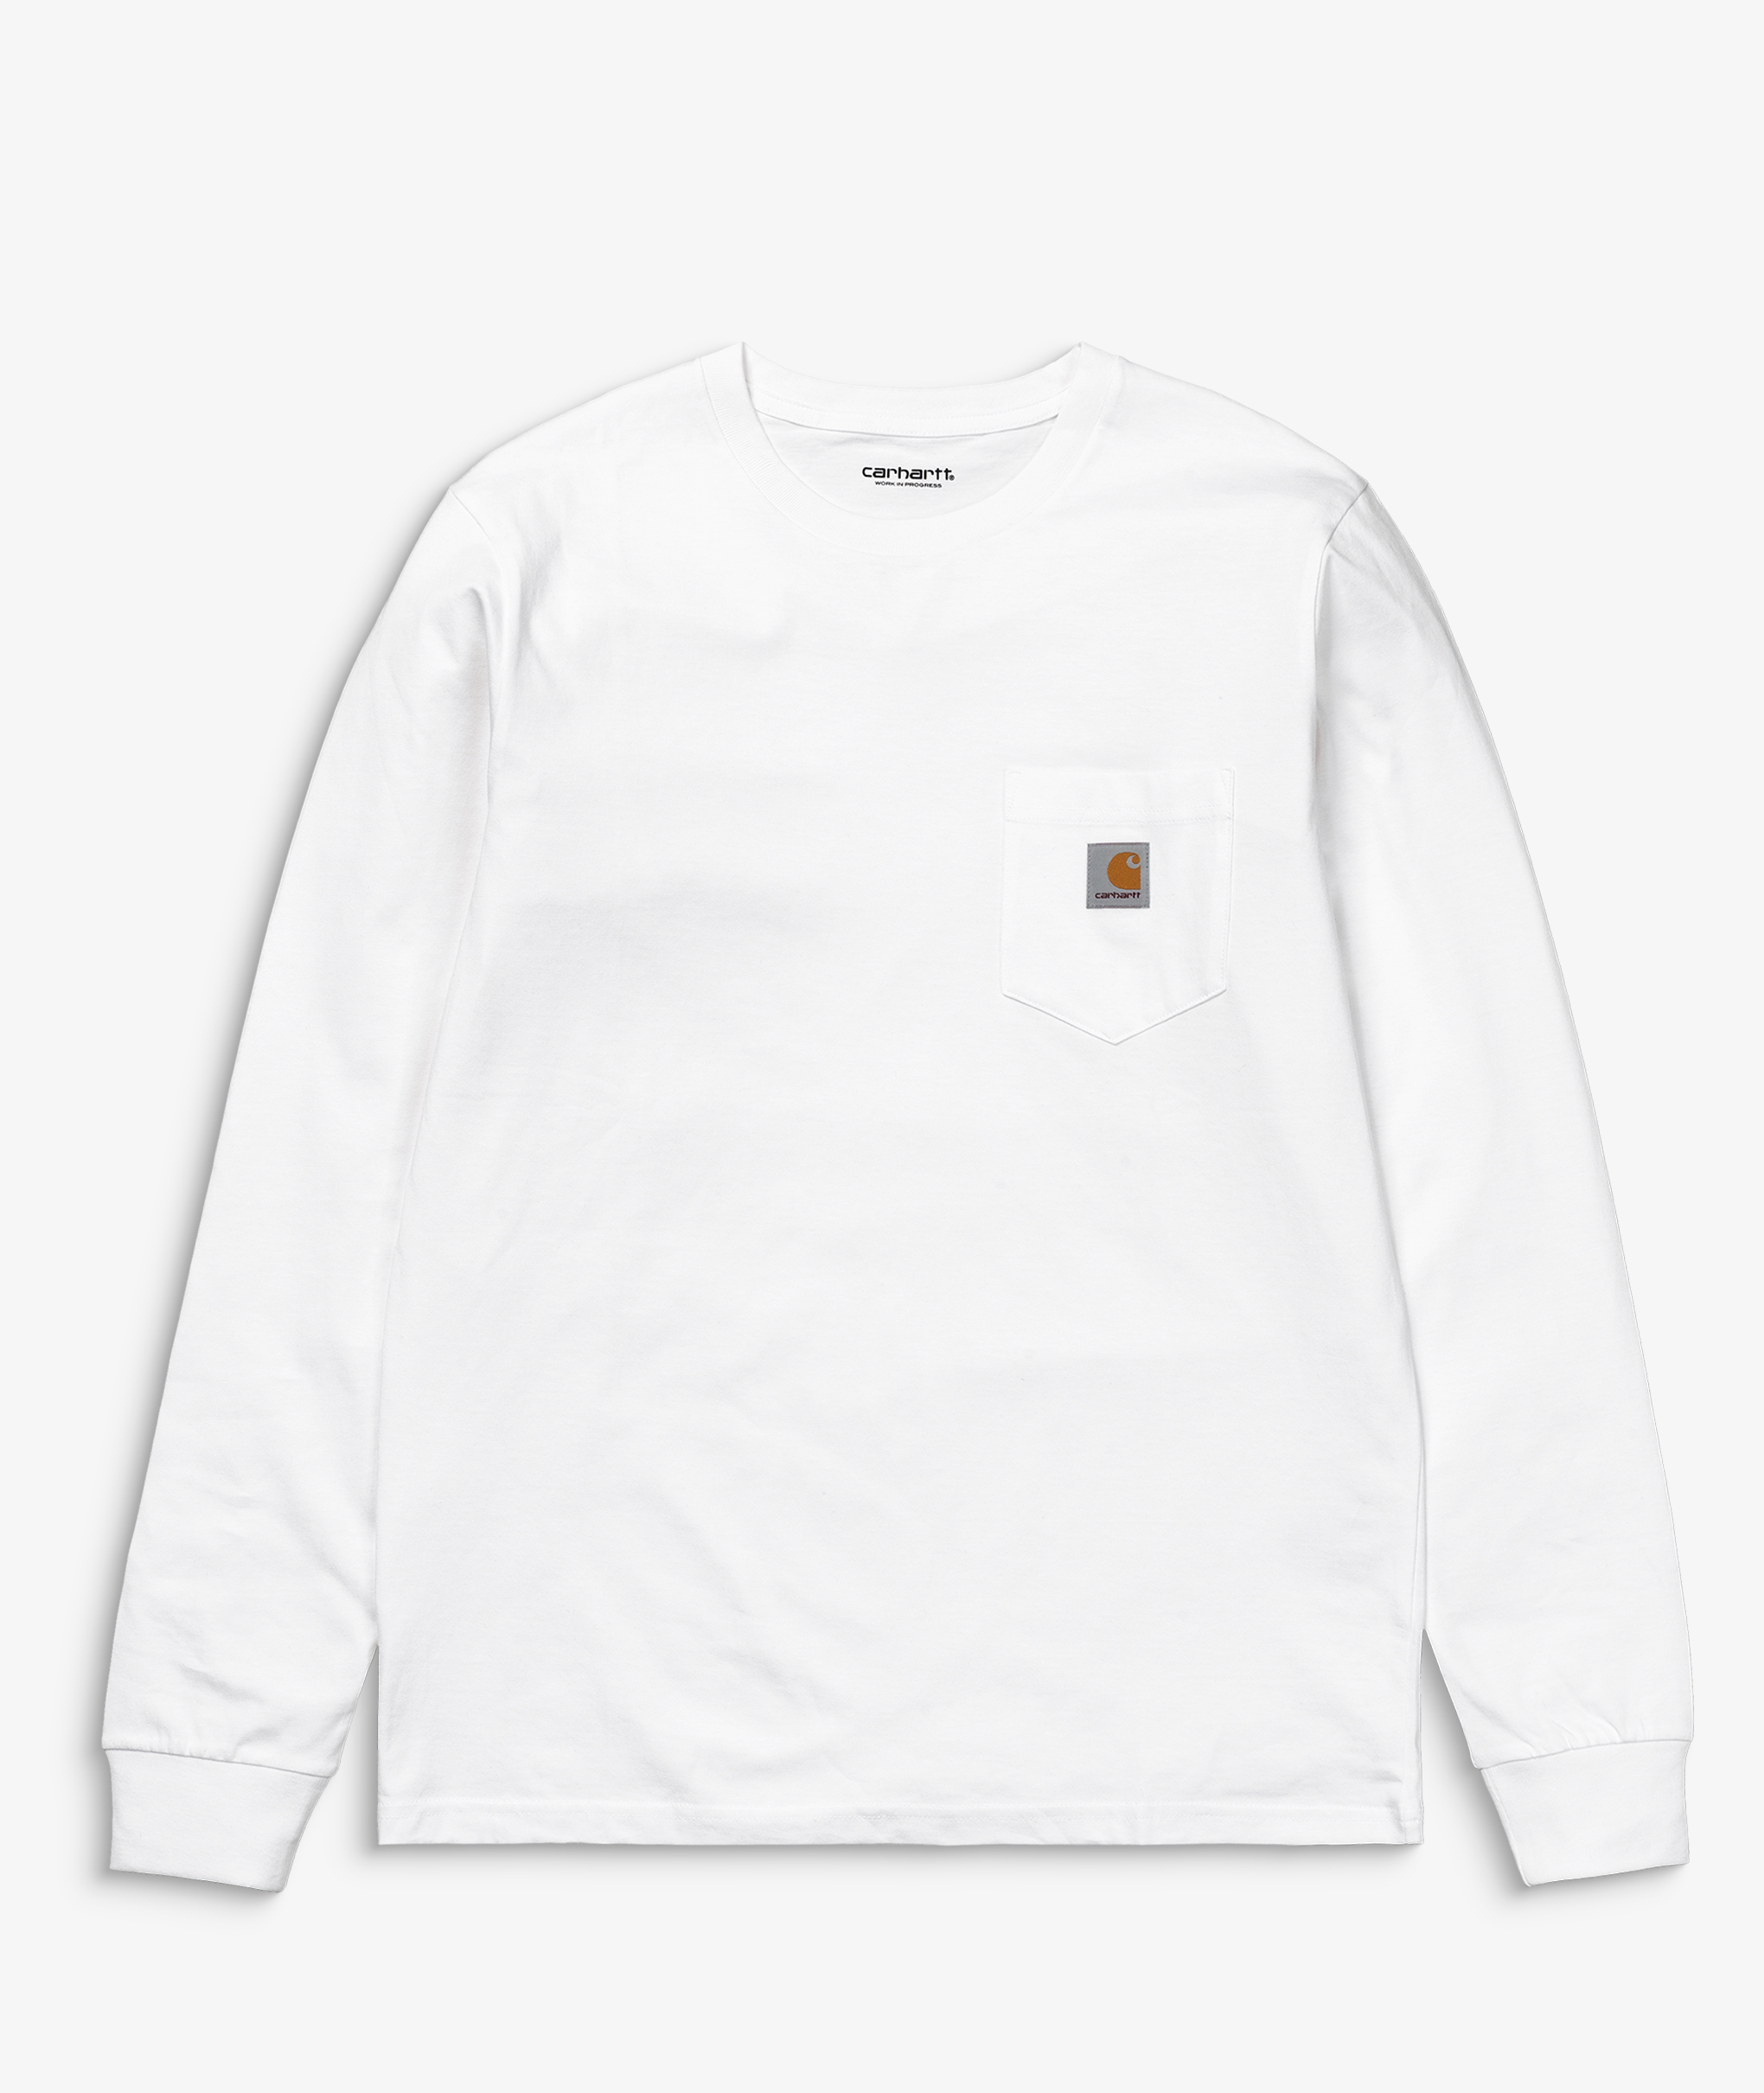 Norse Store | Shipping Worldwide - Carhartt L/S Pocket T-Shirt - White